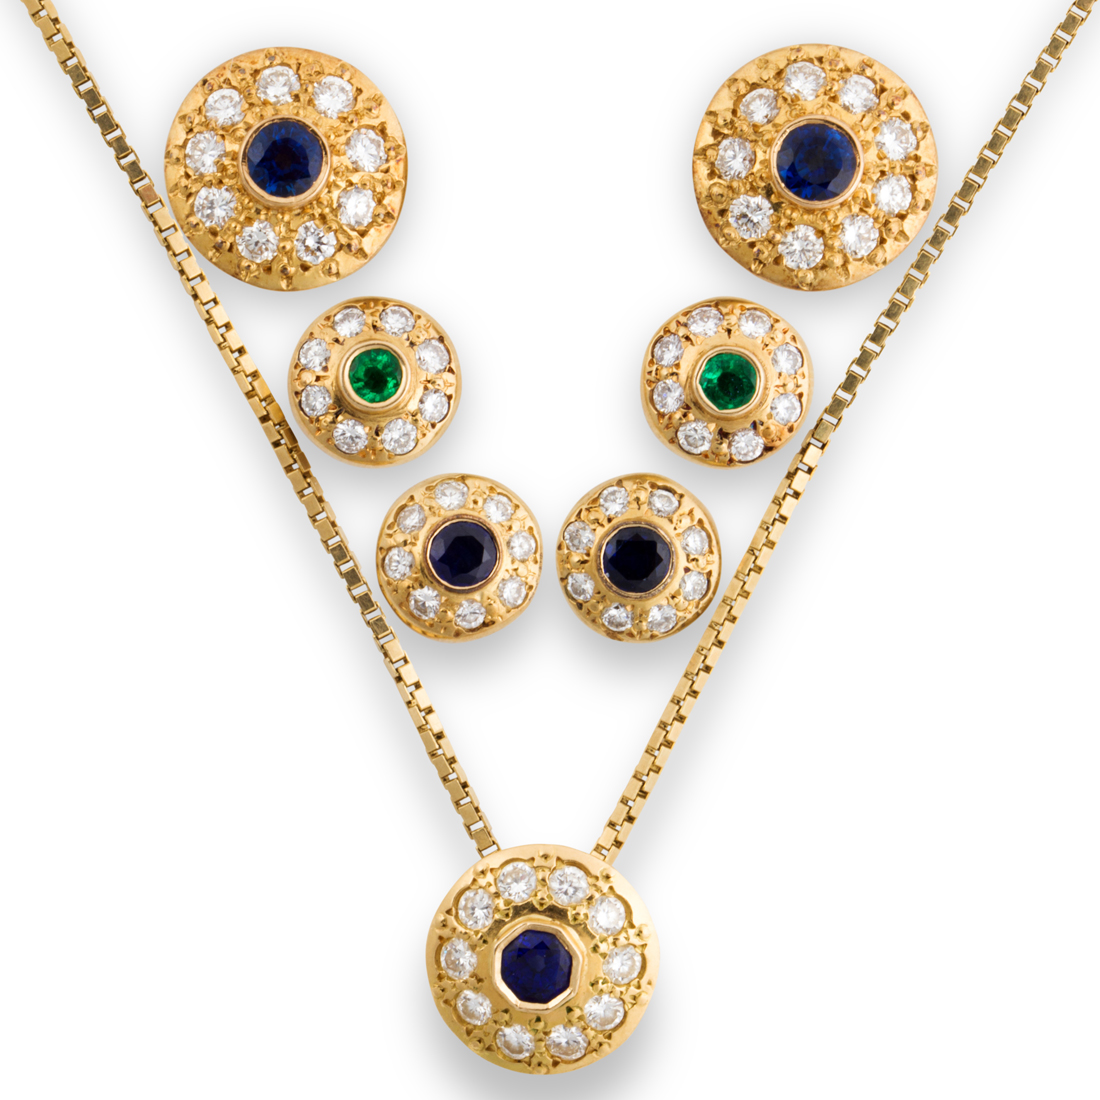 A GROUP OF GEMSTONE AND GOLD JEWELRY